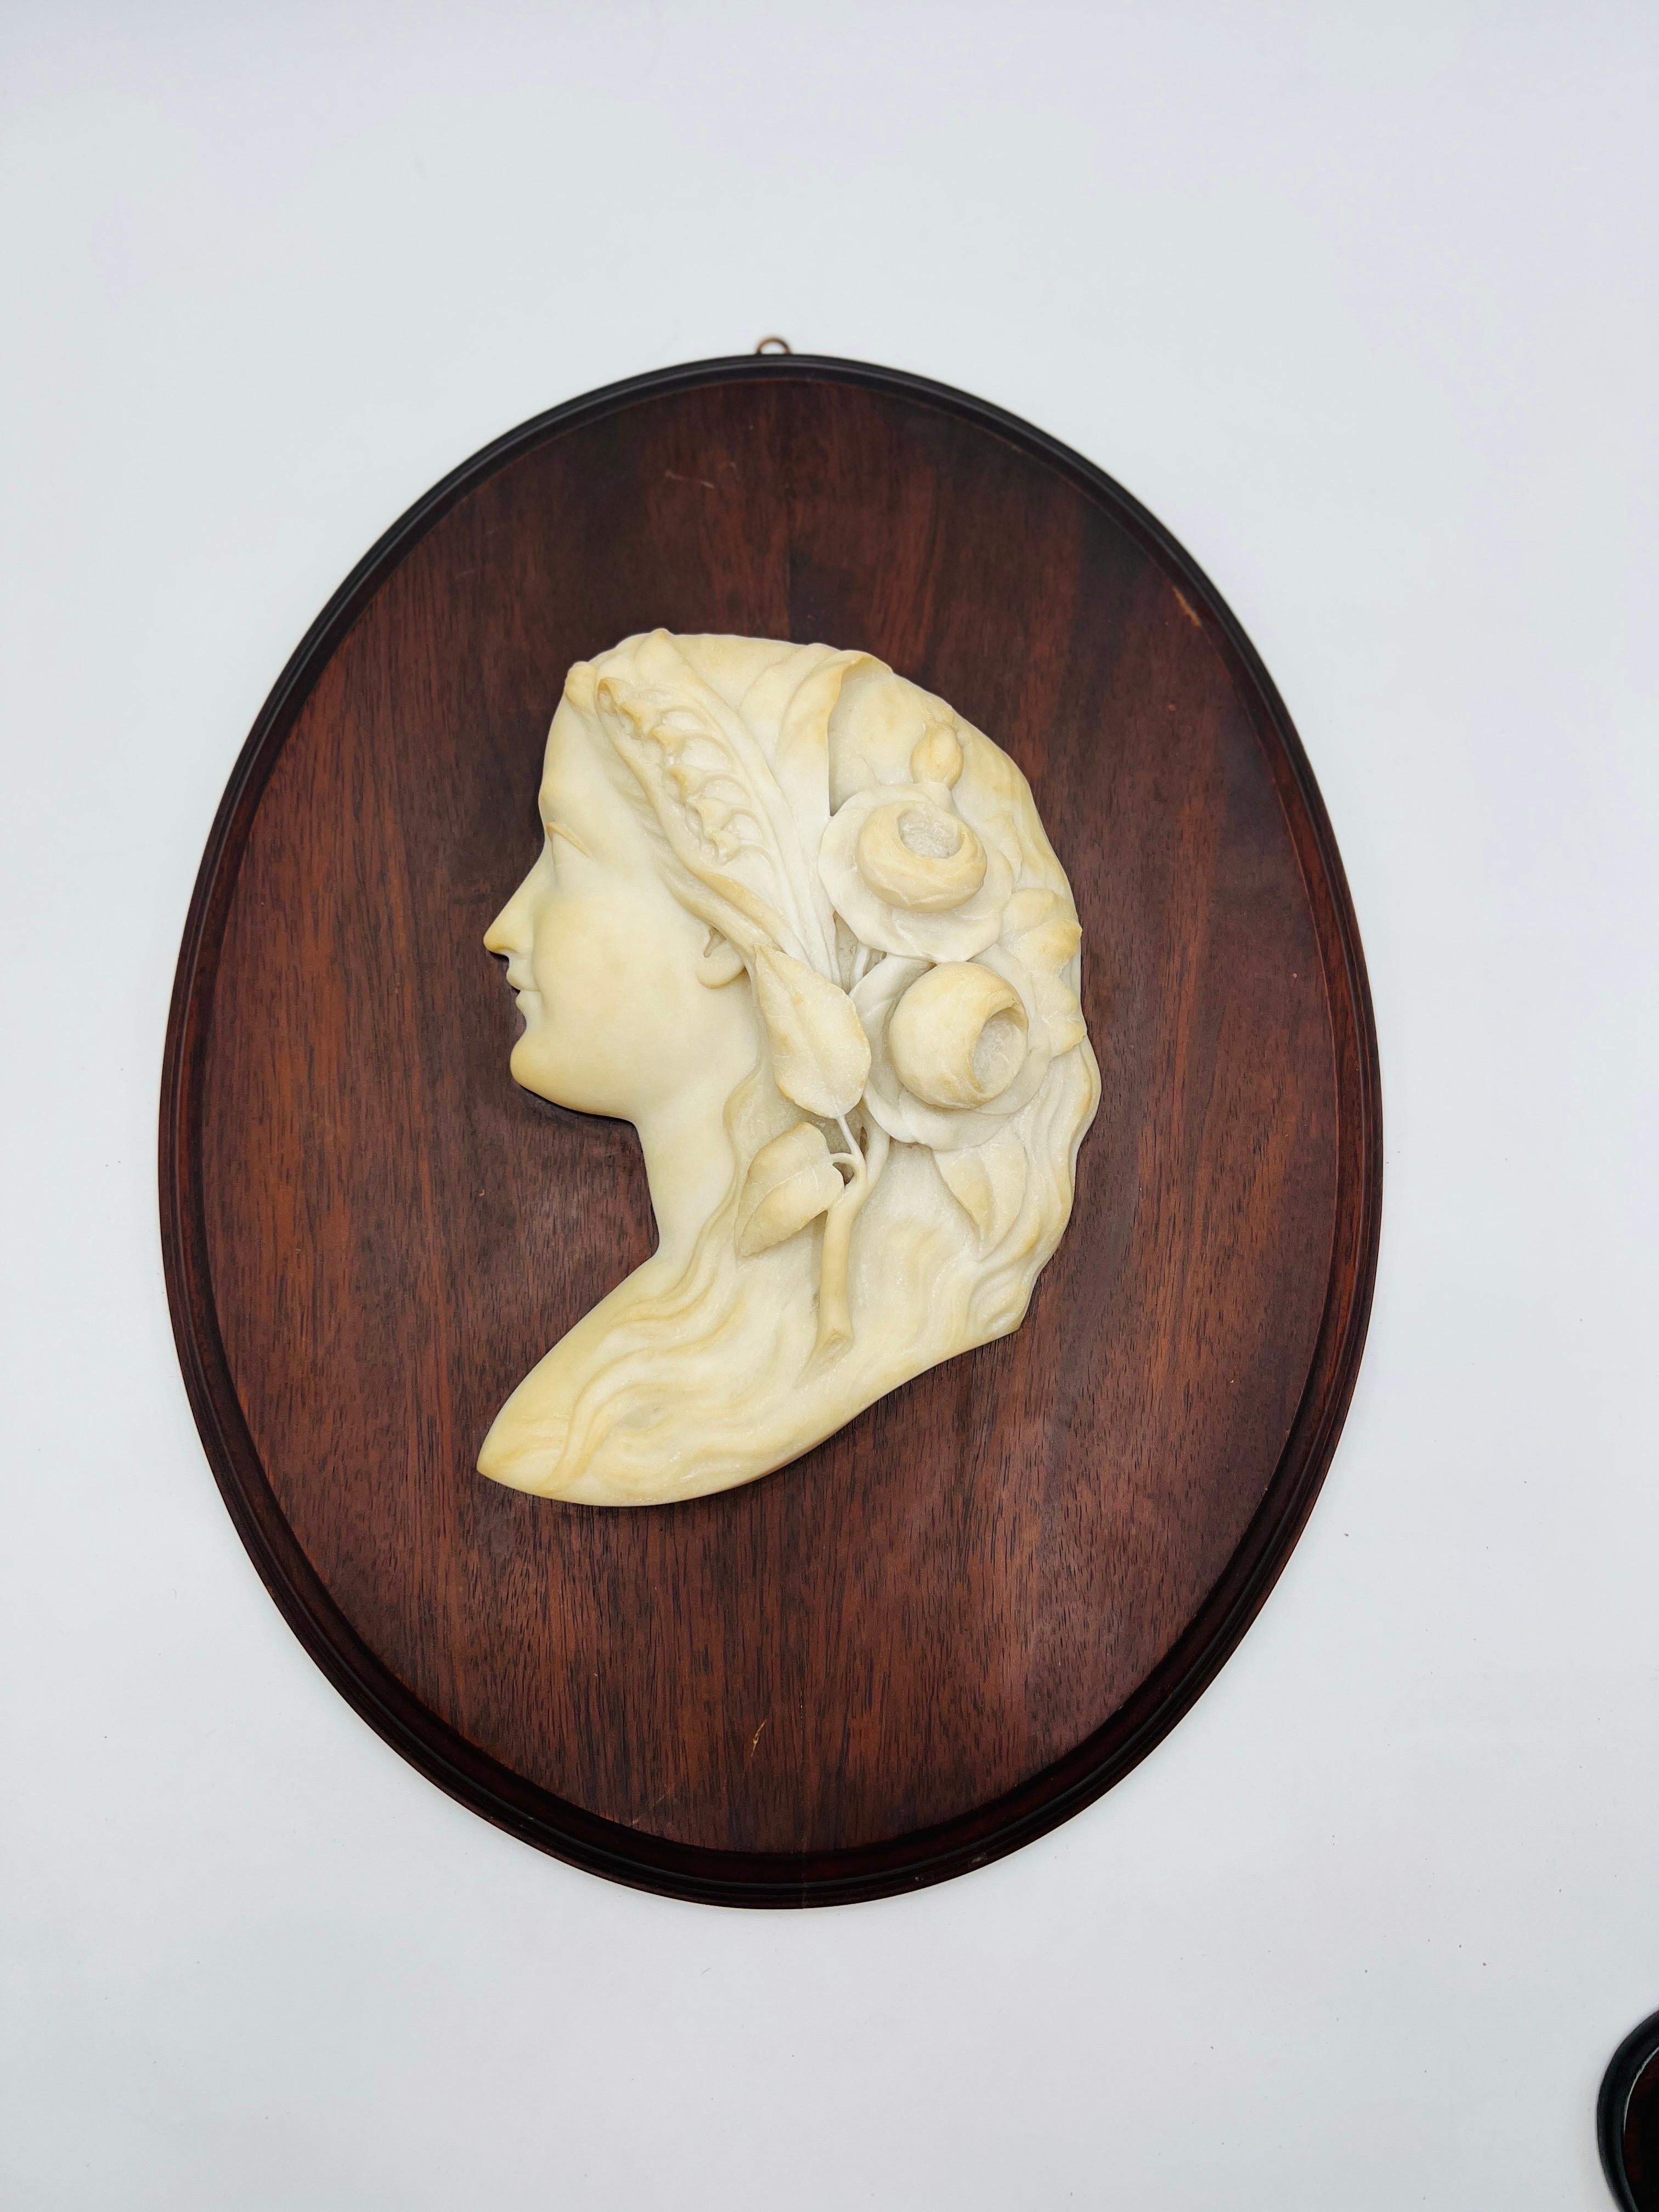 Antique Italian School Carved Marble Female Profile Aesthetic Plaque, circa 1890
A finely hand carved plaque depicting a beautiful female profile bust in white marble. Her hair is adorned with beautiful blossoms. Signed by an unidentified hand to